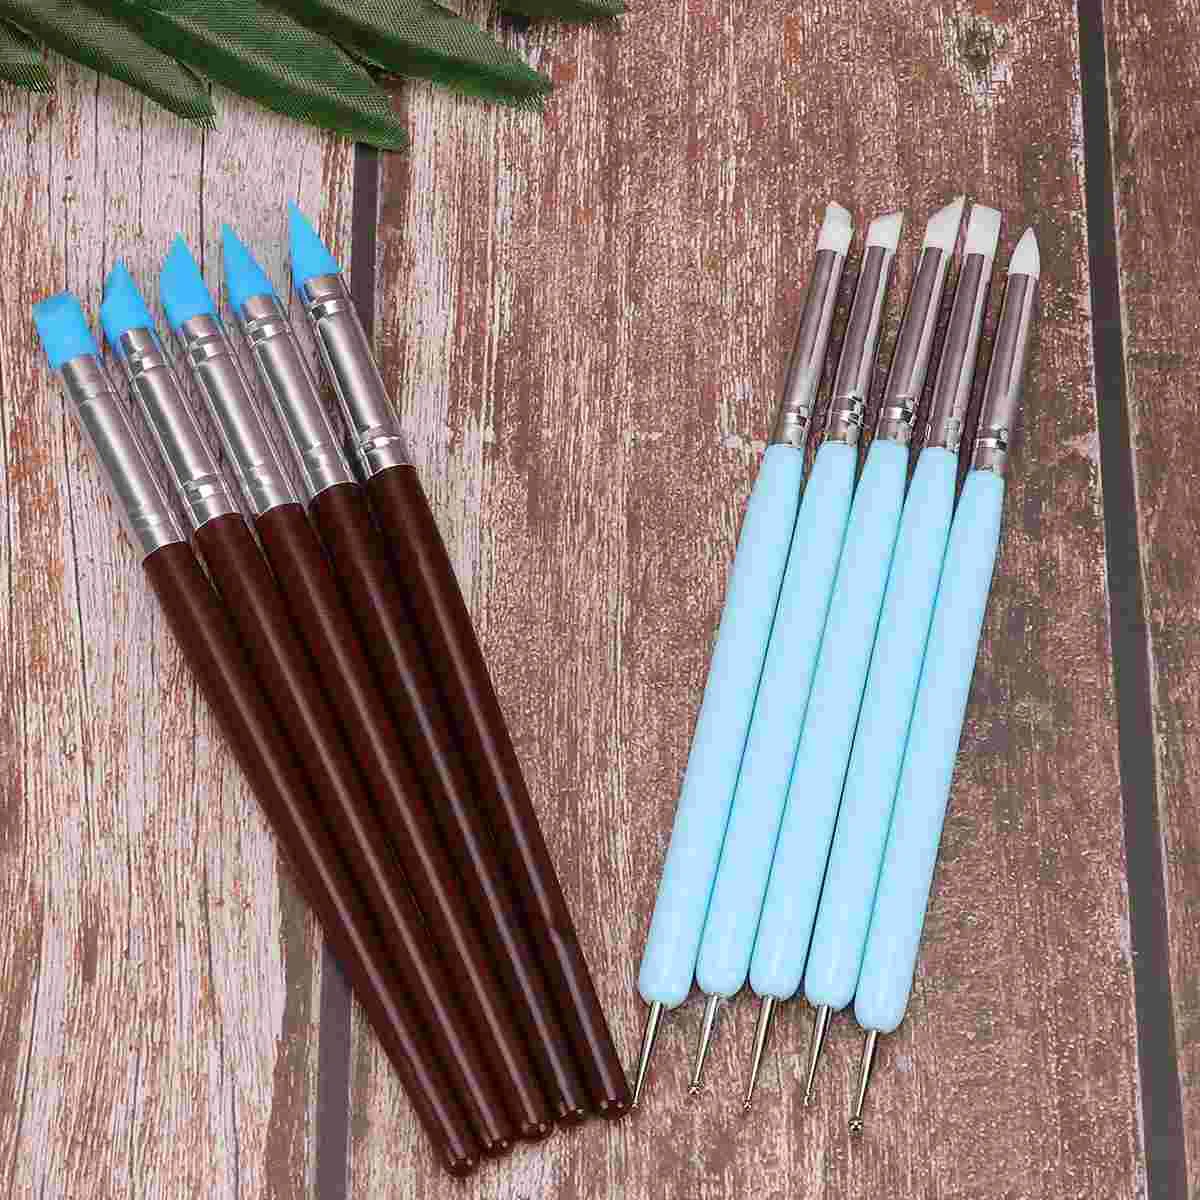 

10PCS Silicone Clay Sculpting Tools, Polymer Modeling Clay Dotting Tool Set for Pottery Sculpture, Nail, DIY Handicraft